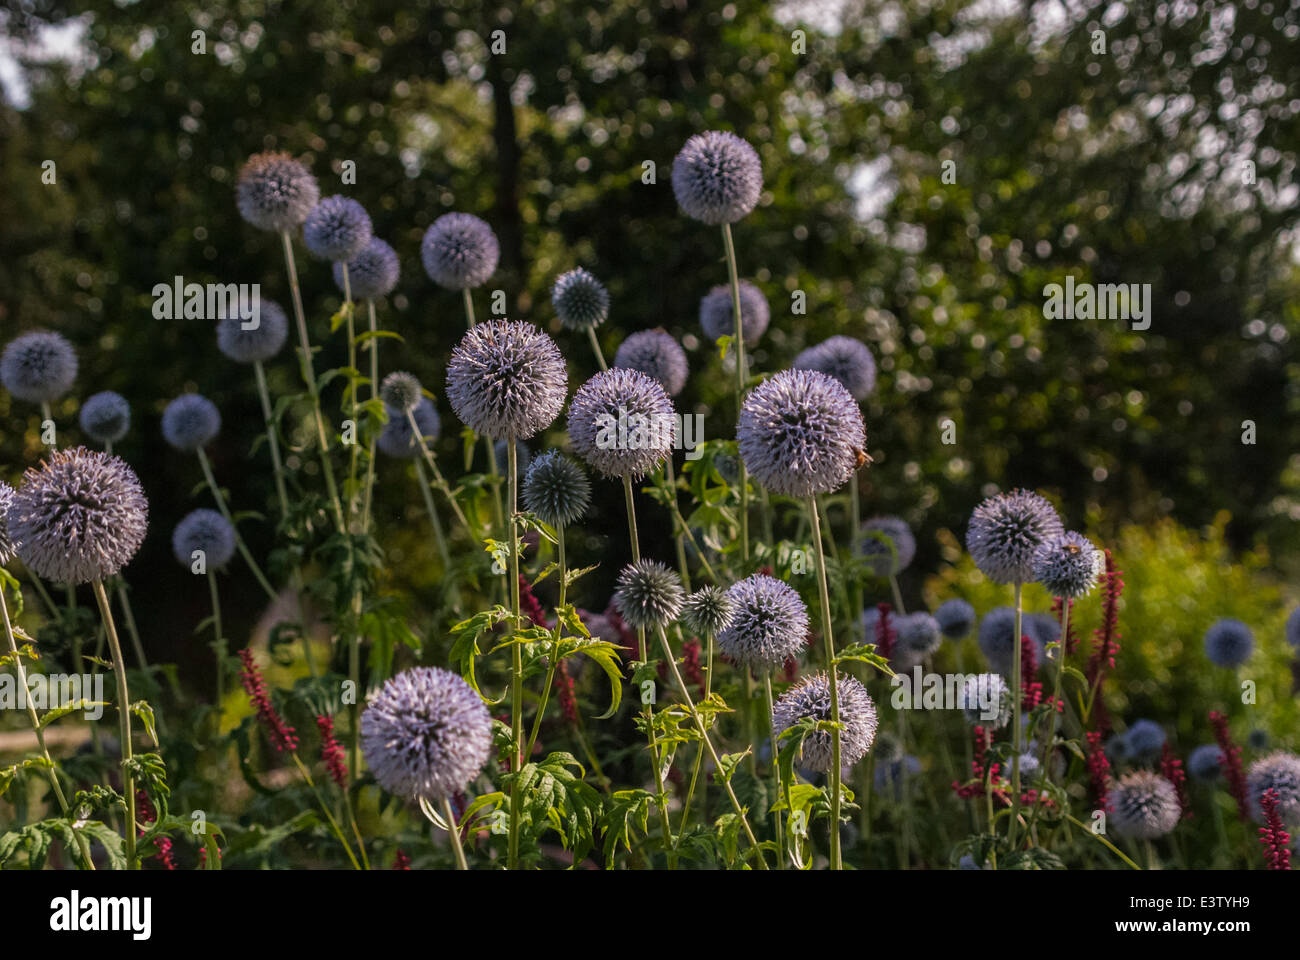 One of the onion plants, Allium, in flower. Stock Photo